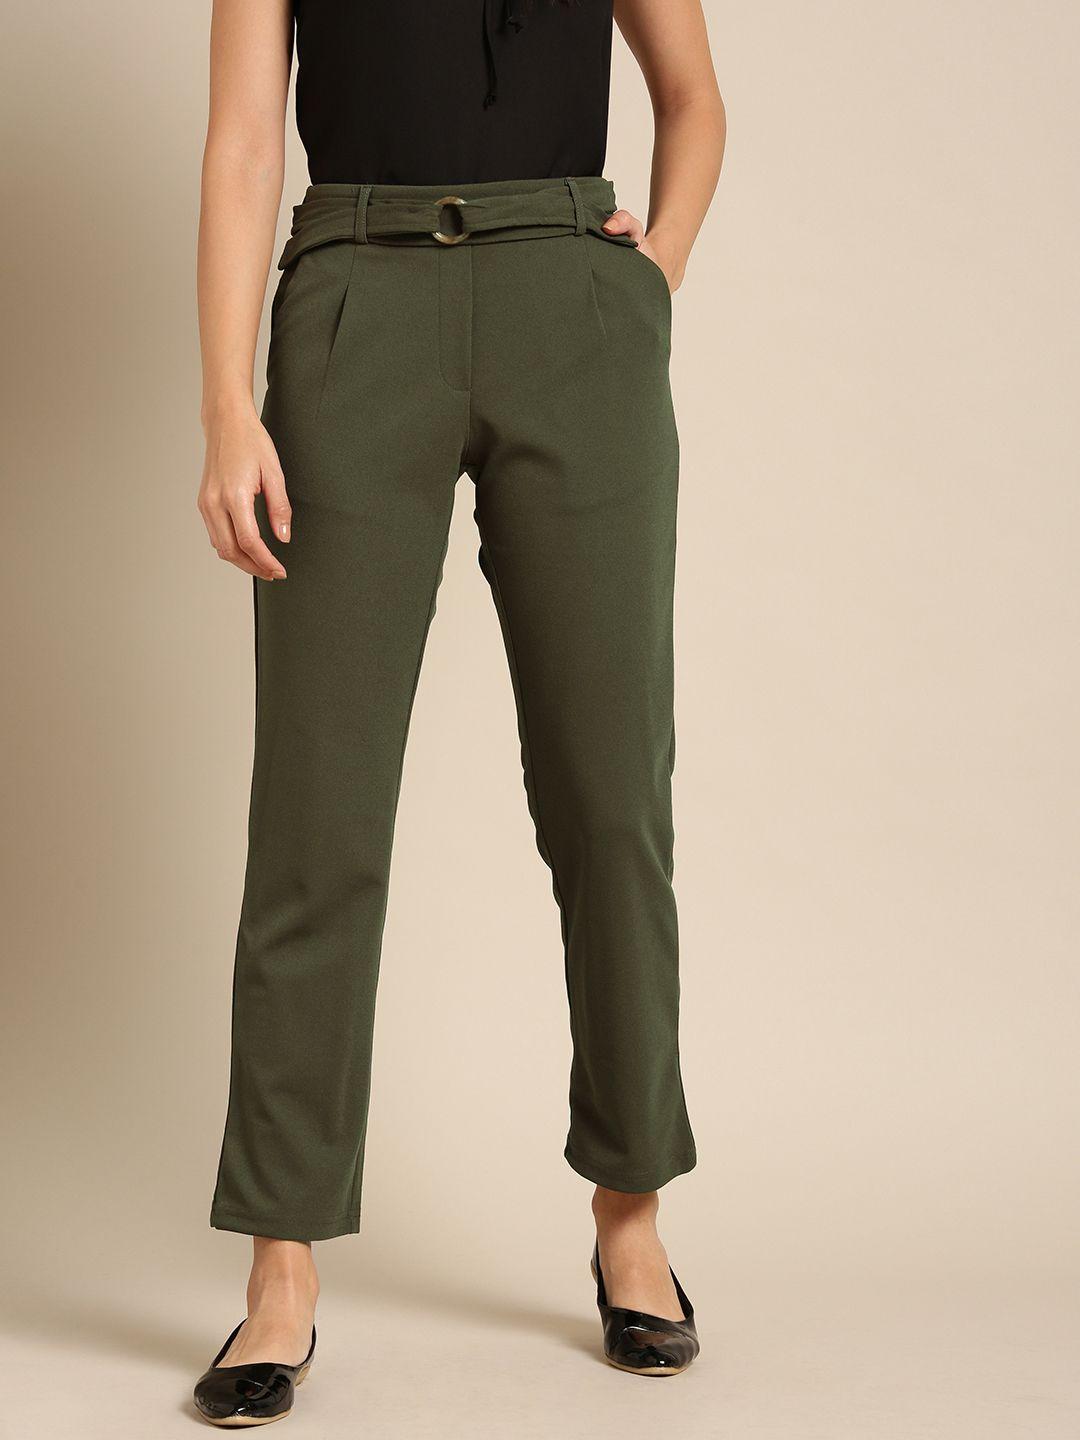 dressberry women olive green regular fit solid trousers